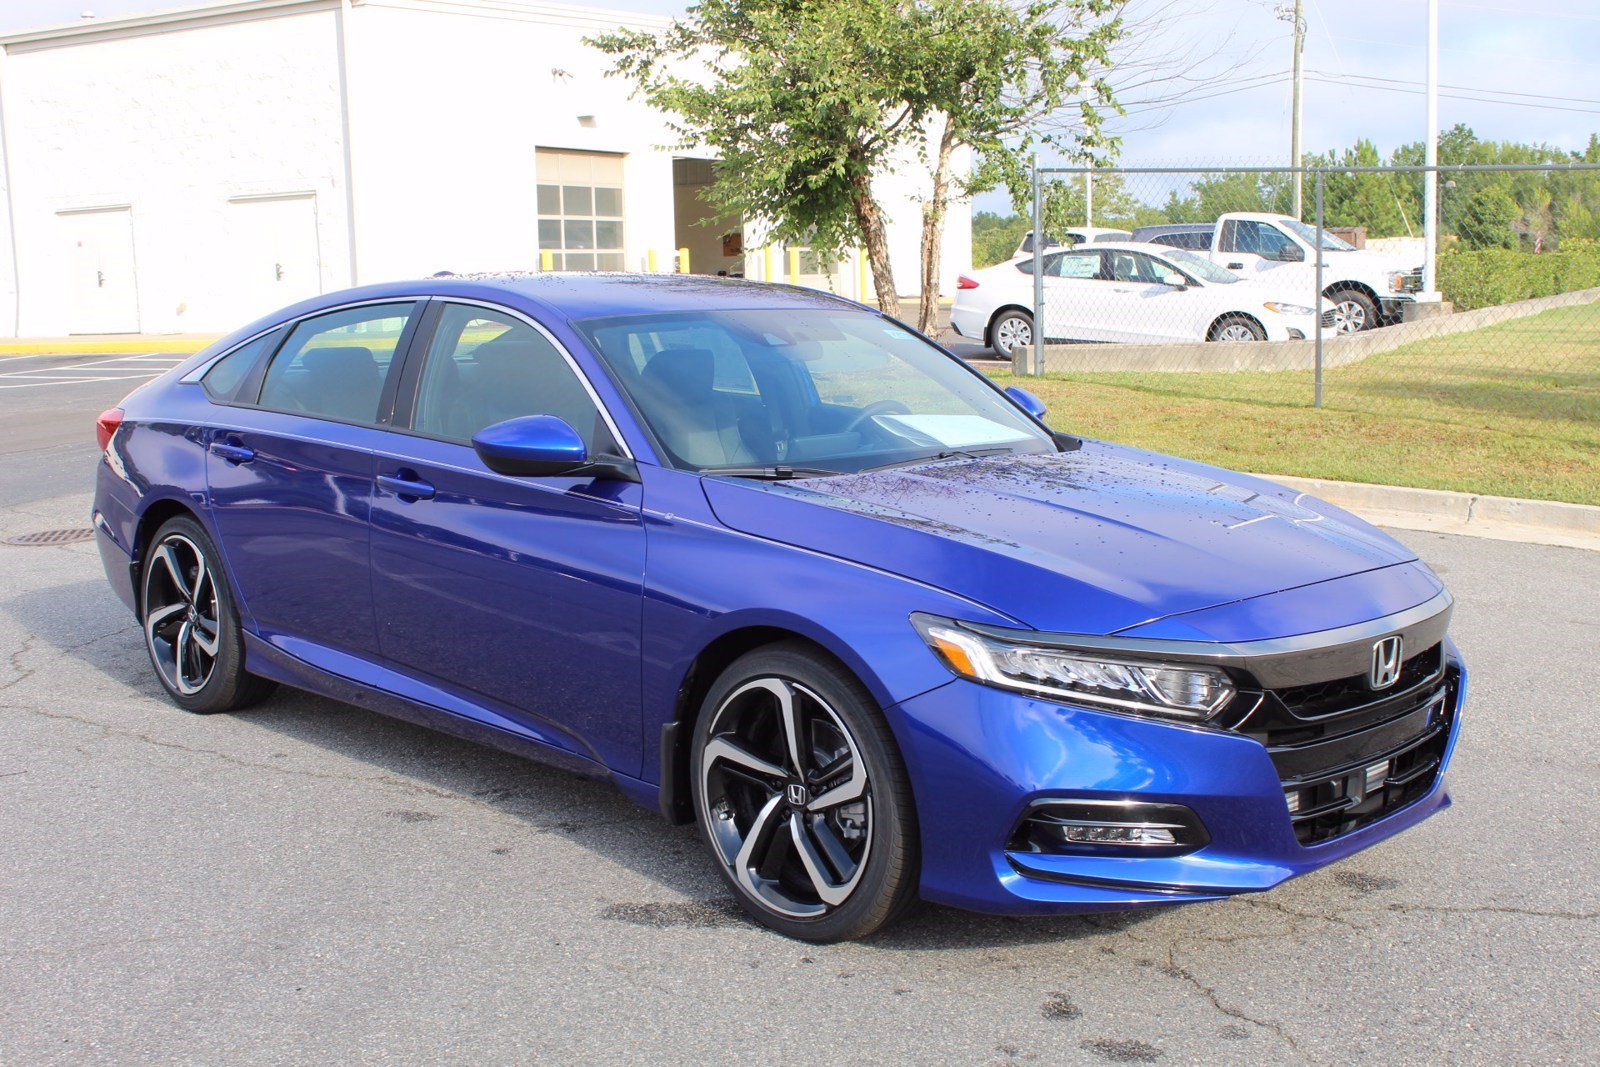 New 2020 Honda Accord Sport 1.5T 4dr Car in Milledgeville #H20305